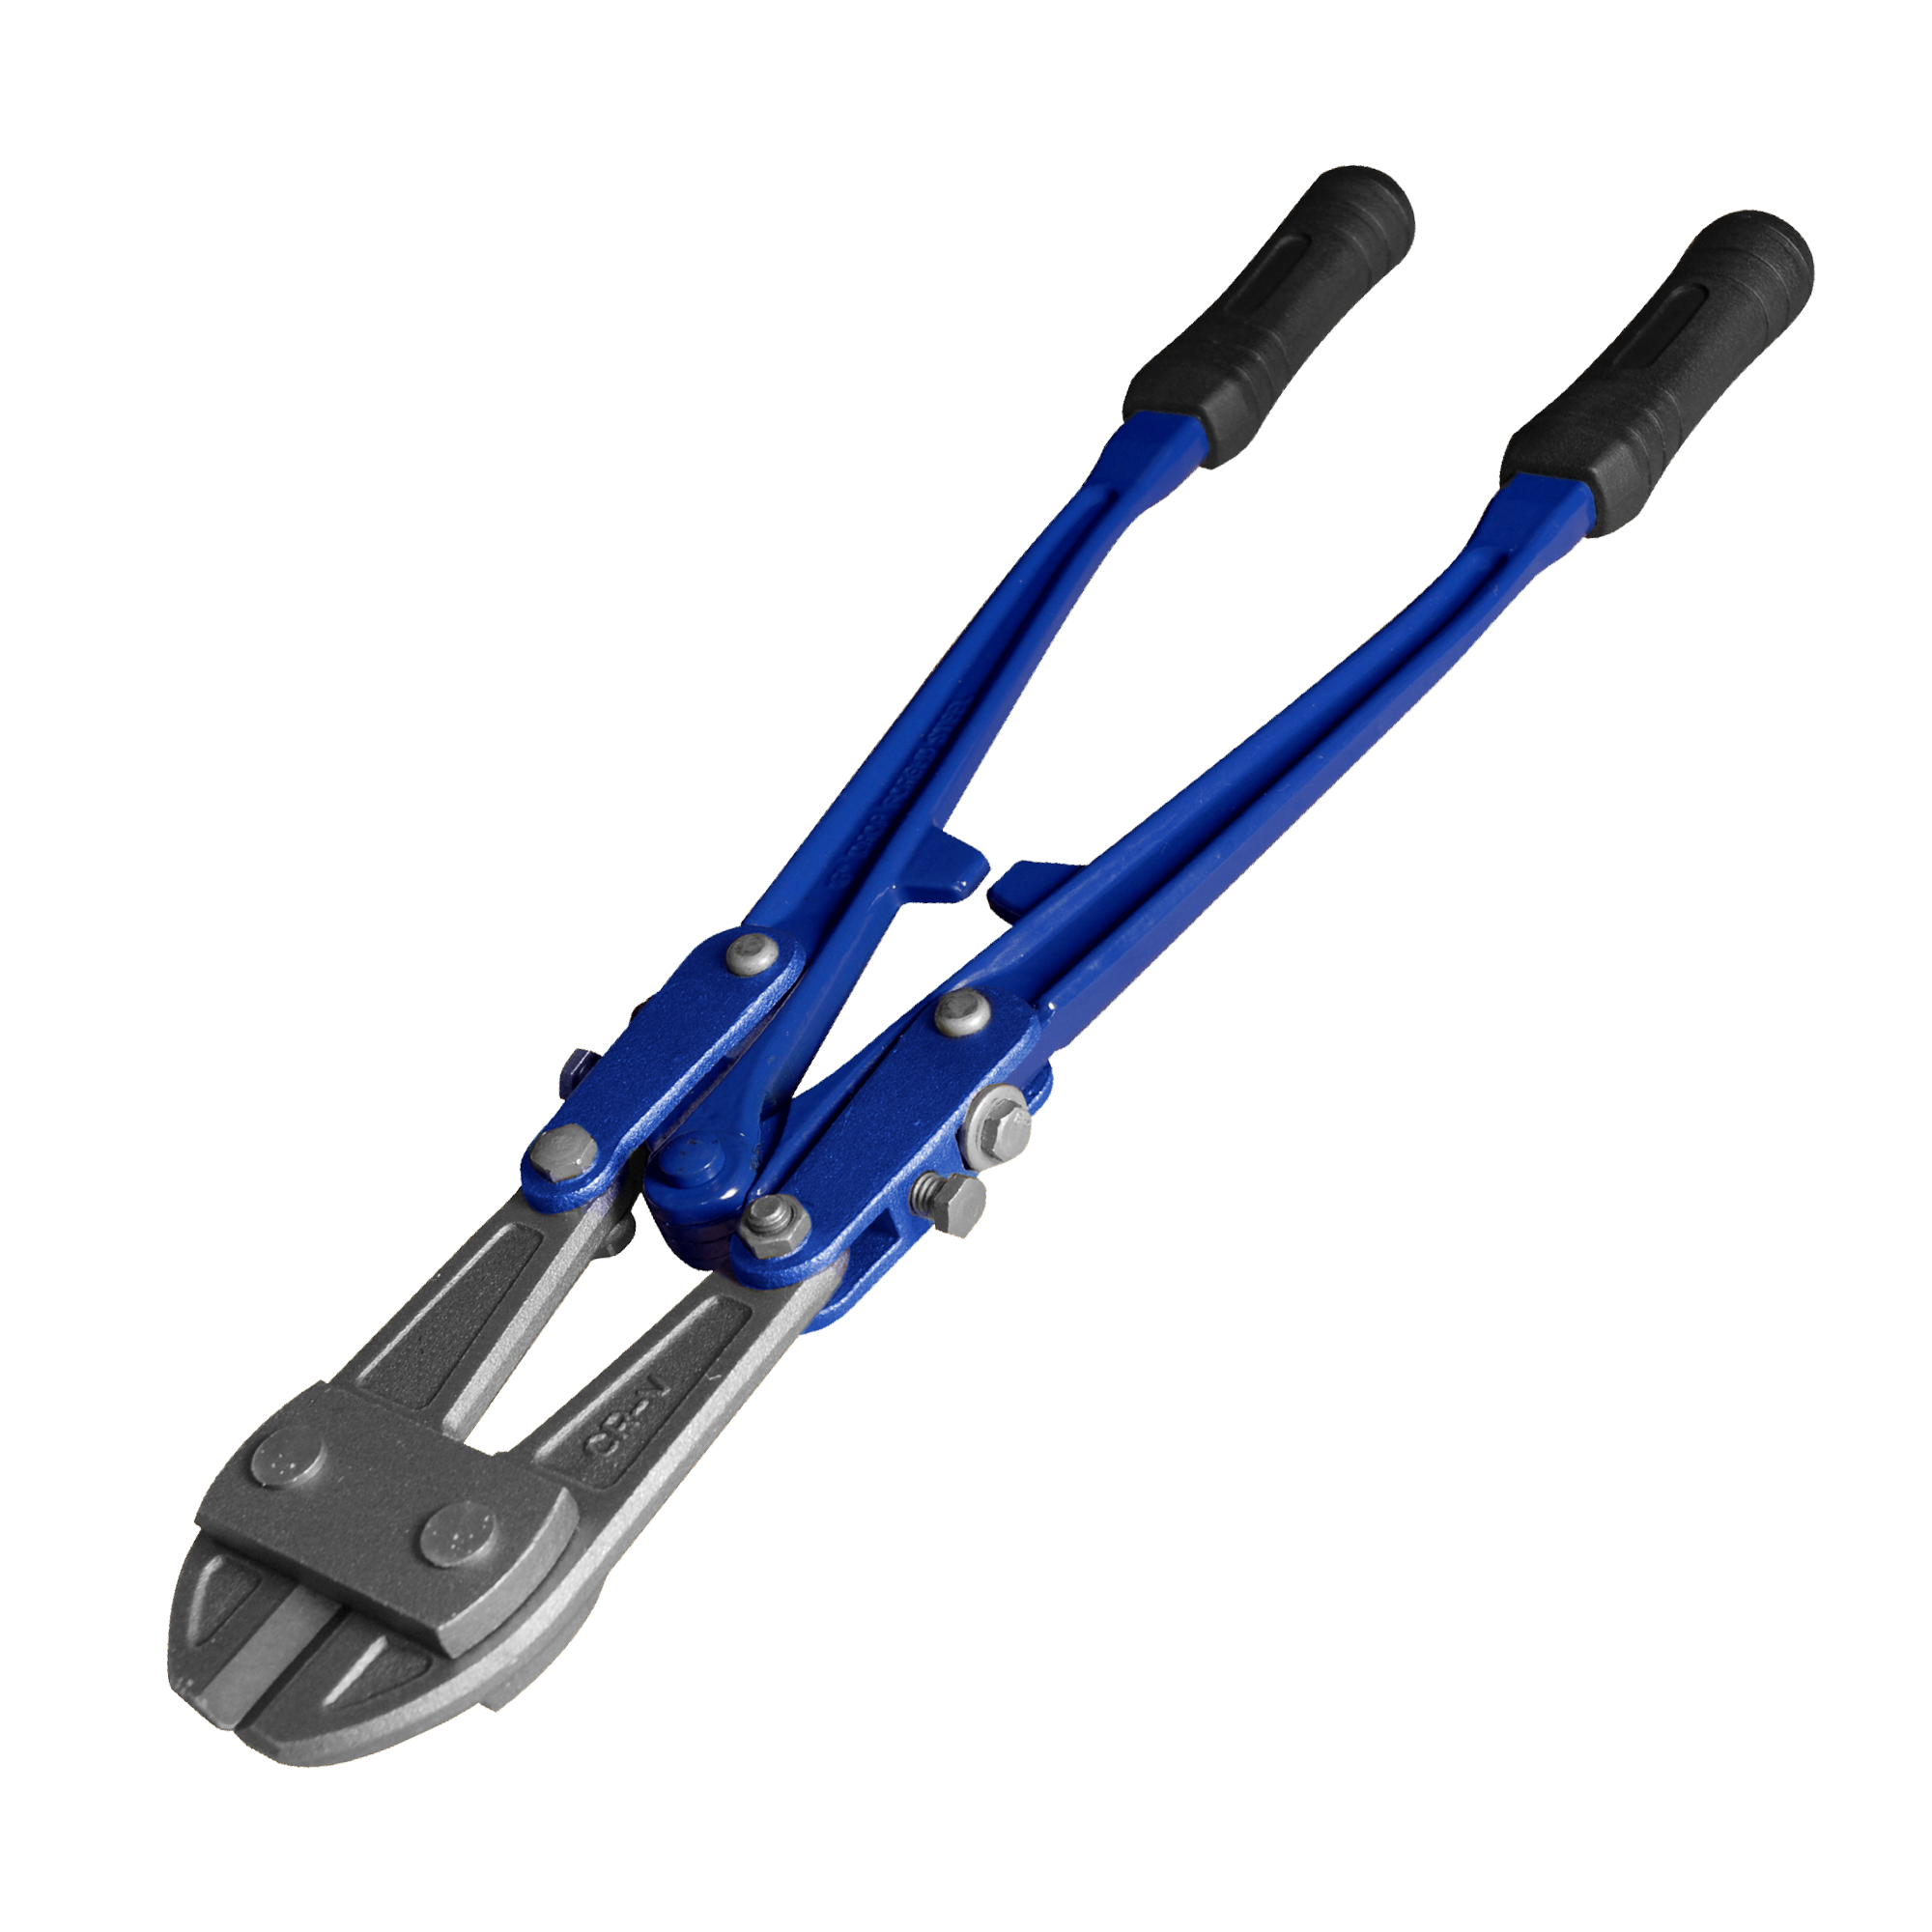 Bolt Cutter Solid Forged Professional 14"- EC-EFBC14 by Eclipse